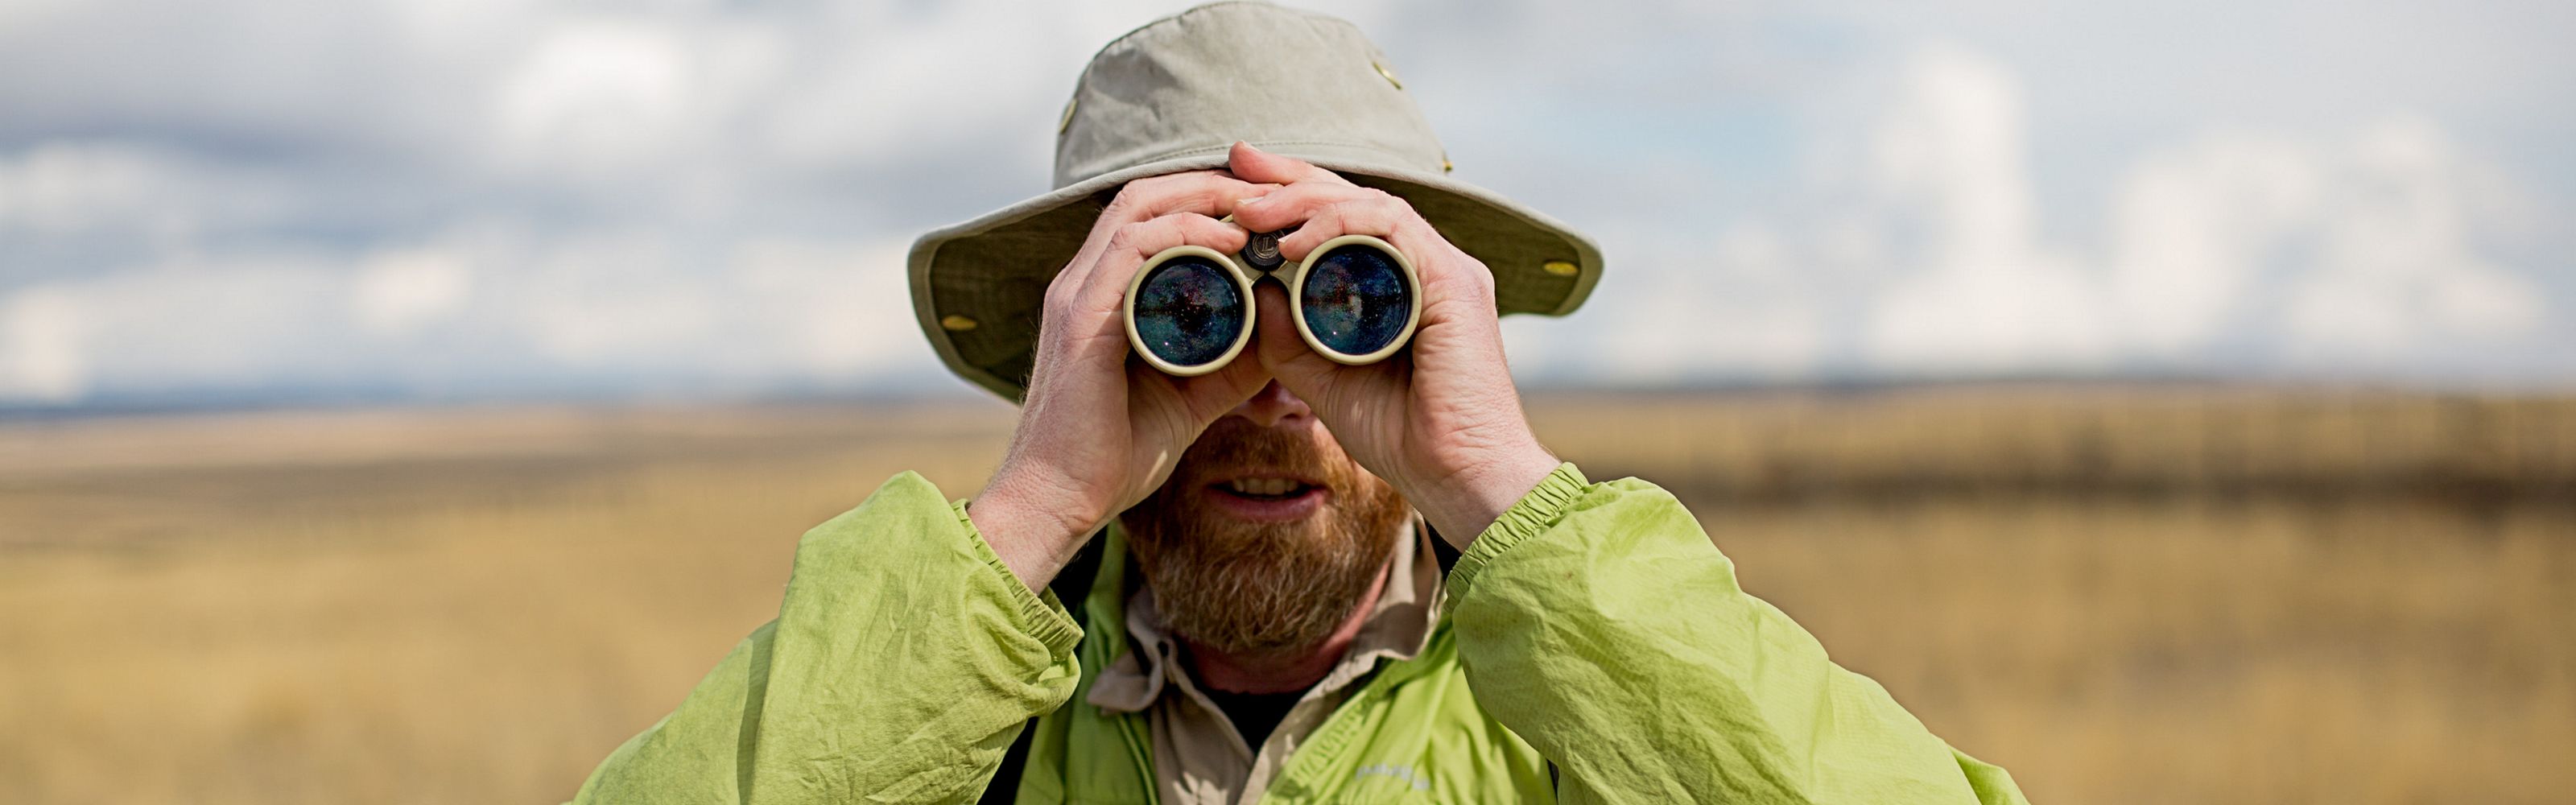 Person wearing hat and looking through binoculars while facing the camera.